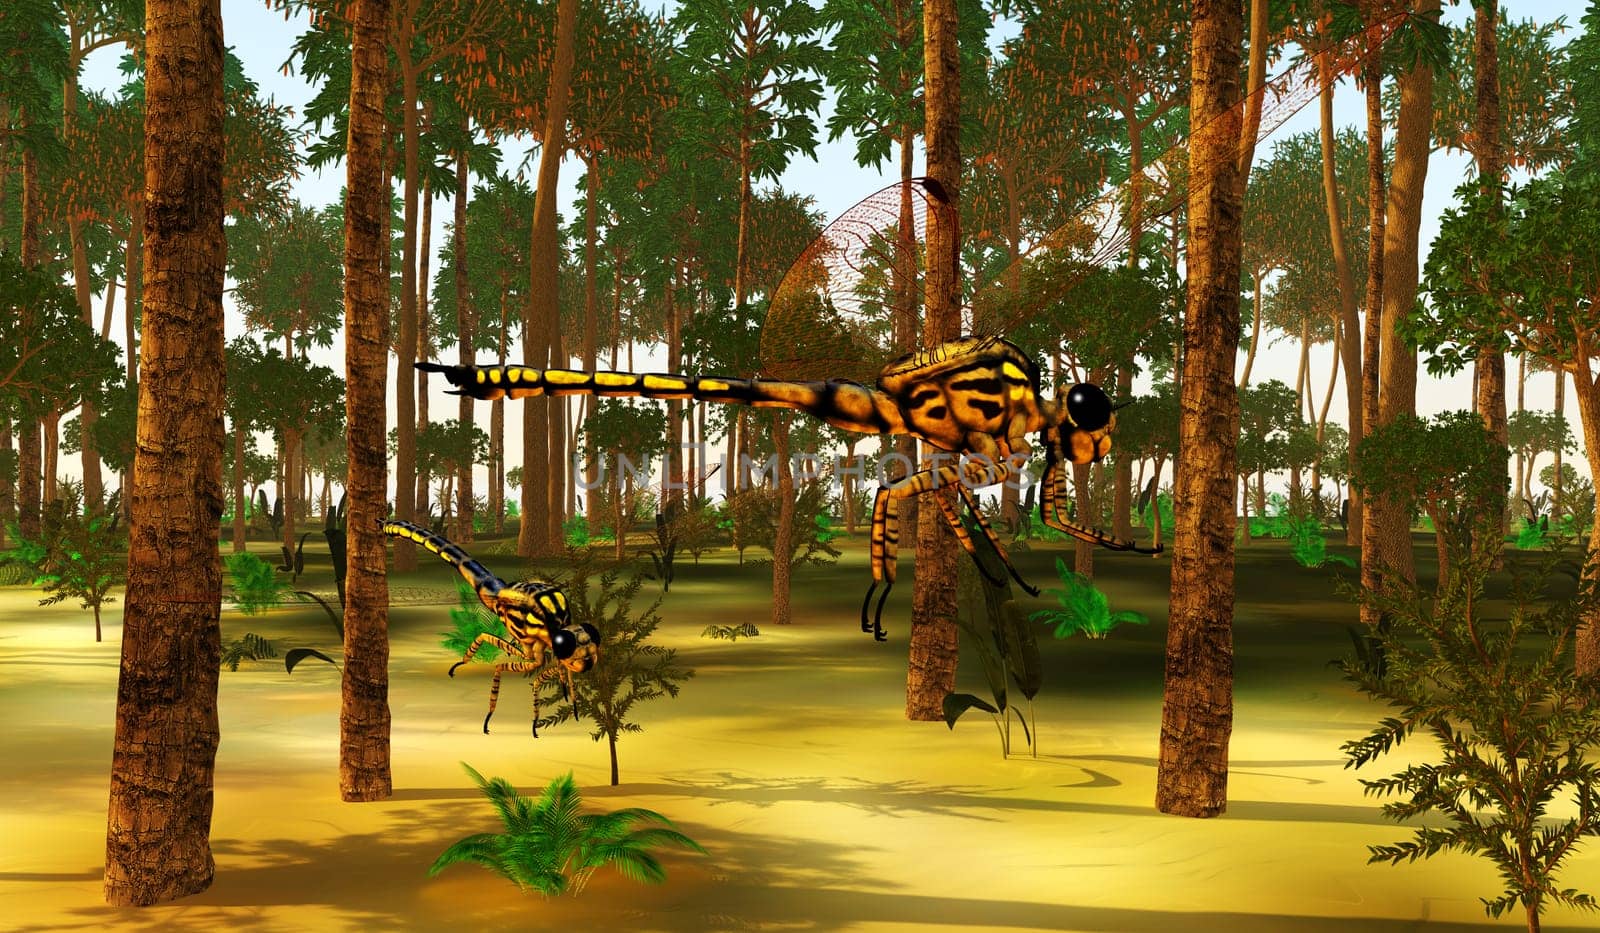 Meganeura was an very large insect that lived in England and France during the Carboniferous Period.